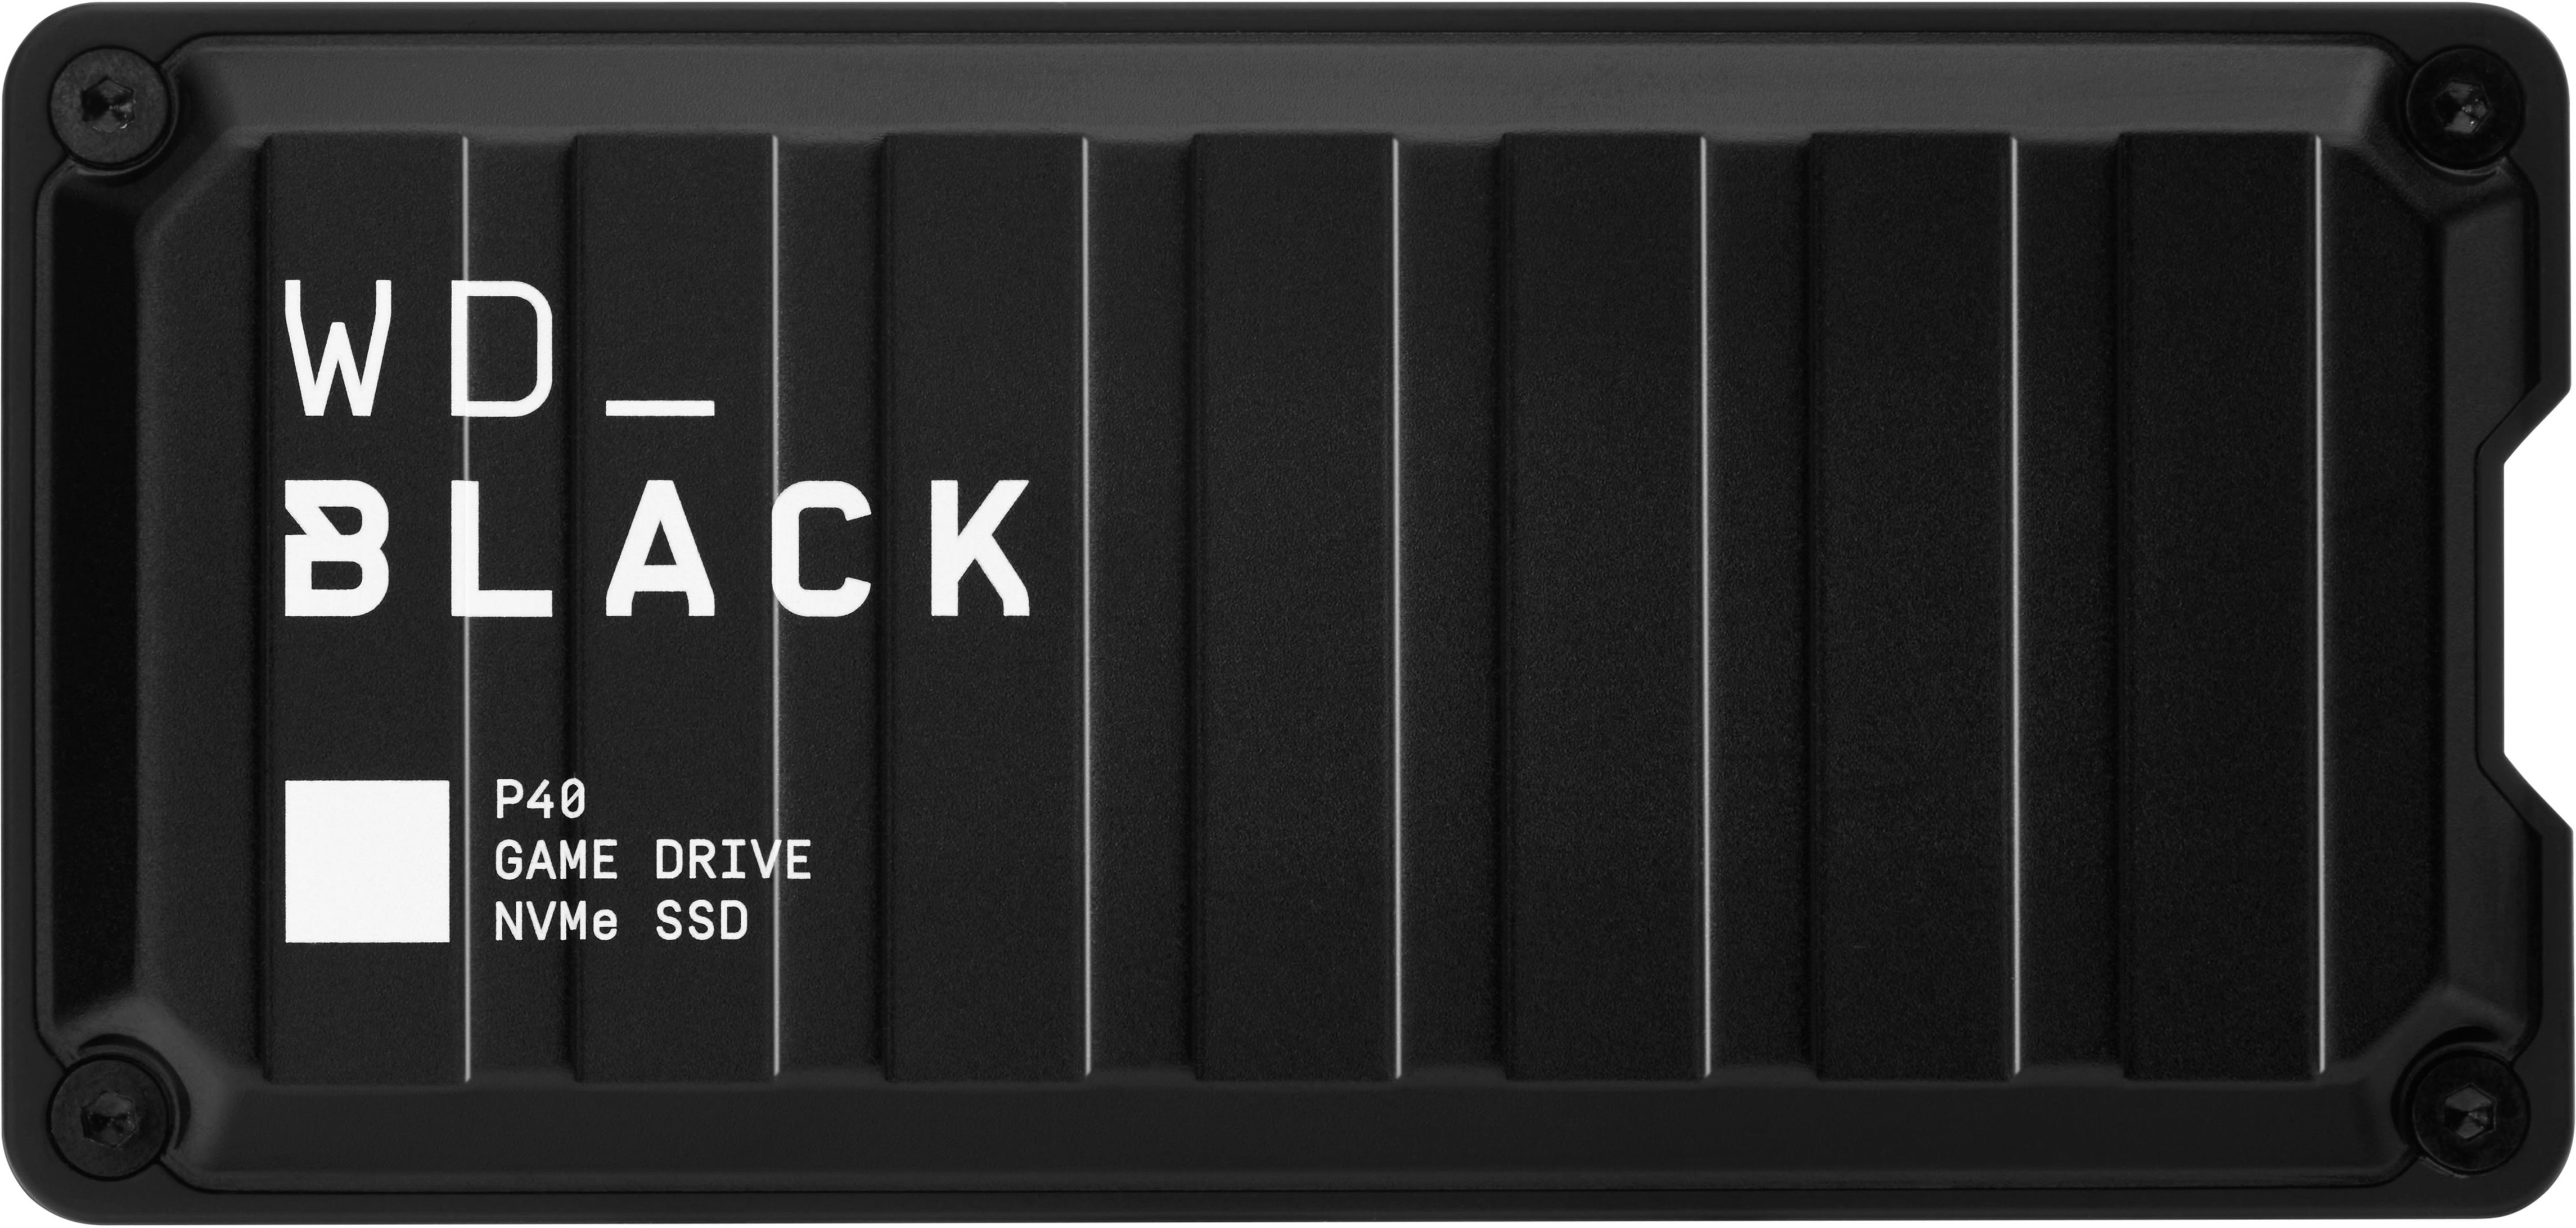 Spectacle Counting insects Job offer WD WD_BLACK P40 Game Drive for PS4, PS5 and Xbox 500GB External USB 3.2 Gen  2x2 Portable SSD Black WDBAWY5000ABK-WESN - Best Buy